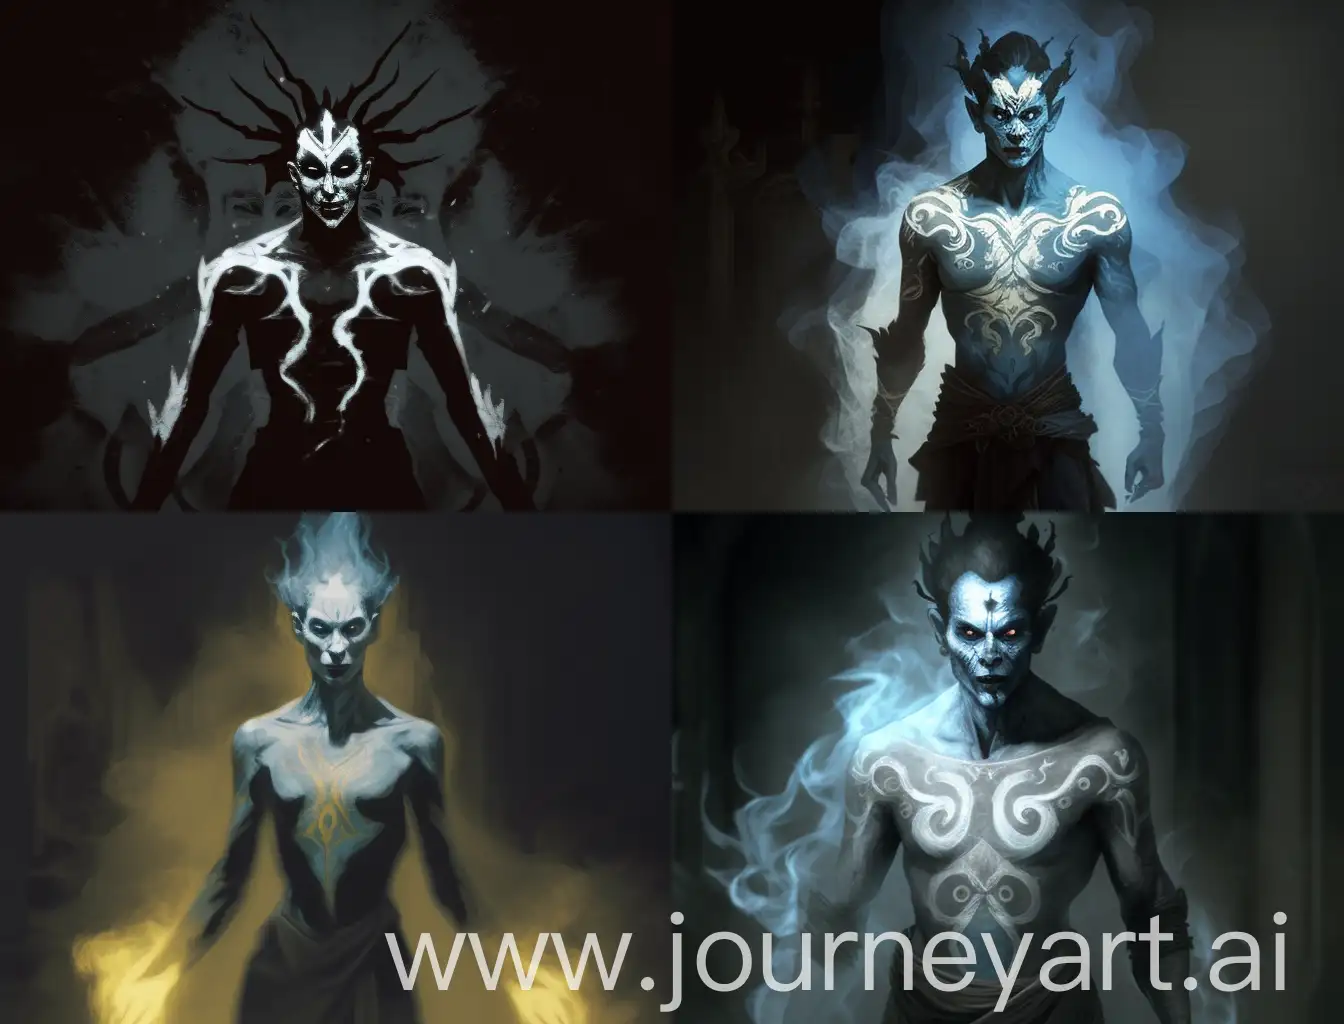 Mystical-Solo-Ghost-with-Demonic-Aura-and-Mysterious-Symbols